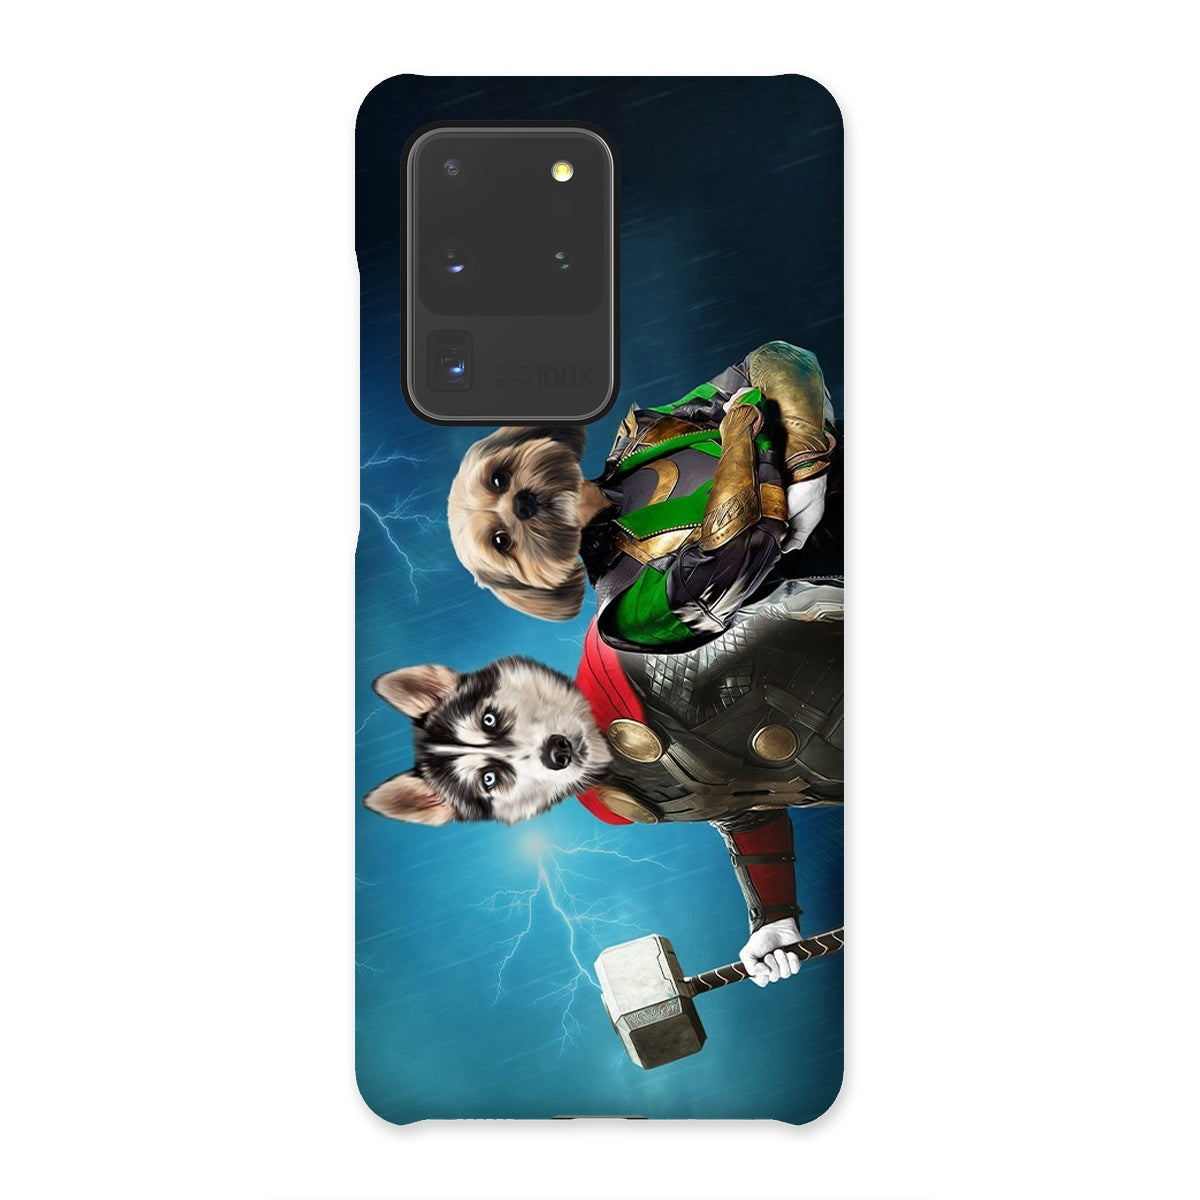 Thor & Loki: Custom Pet Phone Case, Paw & Glory, paw and glory, painting pets, pet portraits in oils, dog portrait painting, Pet portraits, Hattie & Hugo pet paintings from photo,